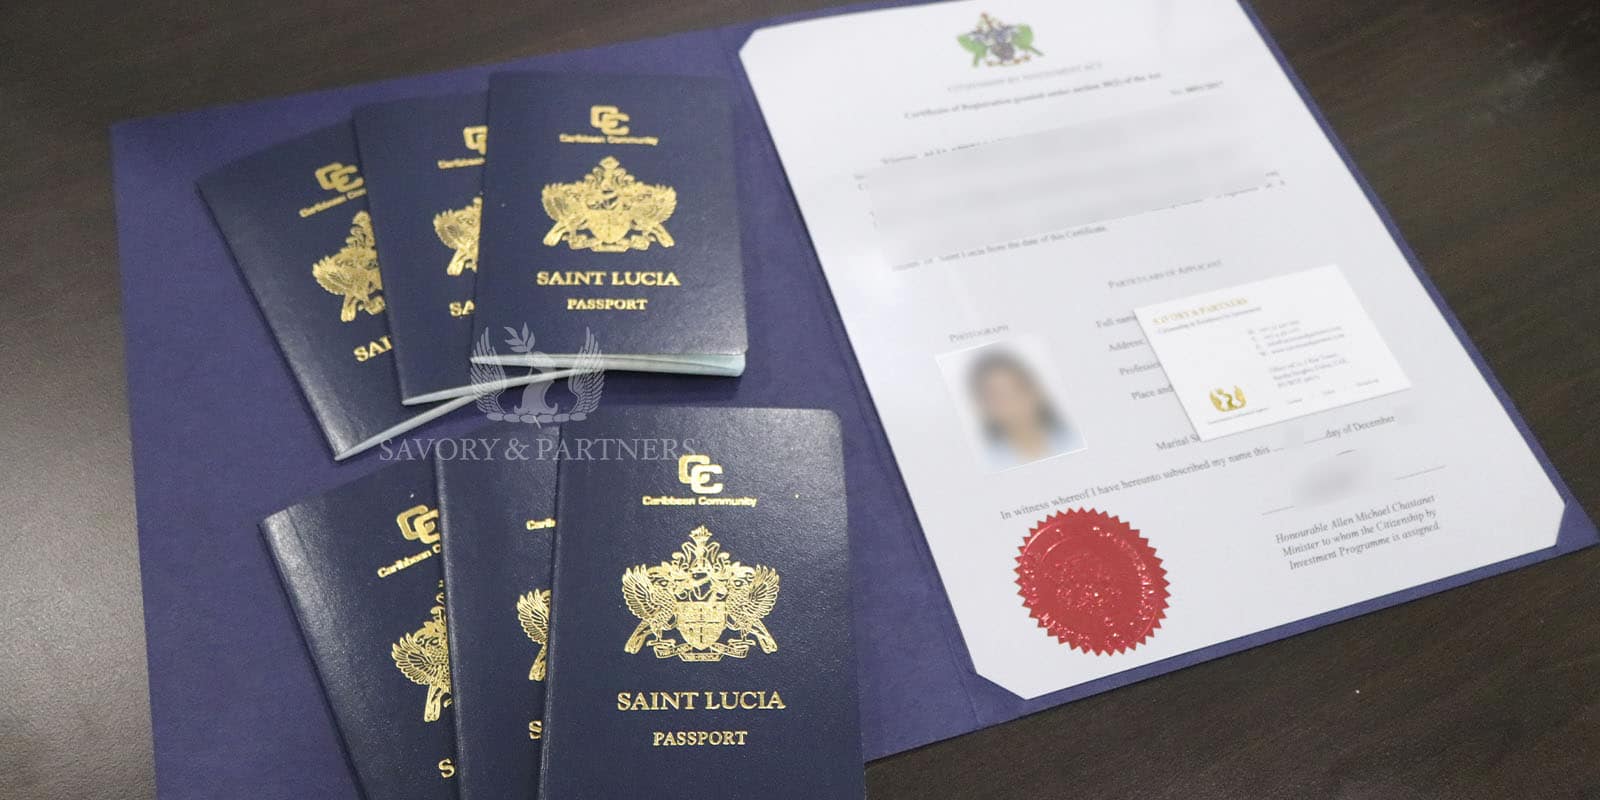 Saint Lucia passports for a family of 6 at Savory & Partners office in Dubai, UAE.